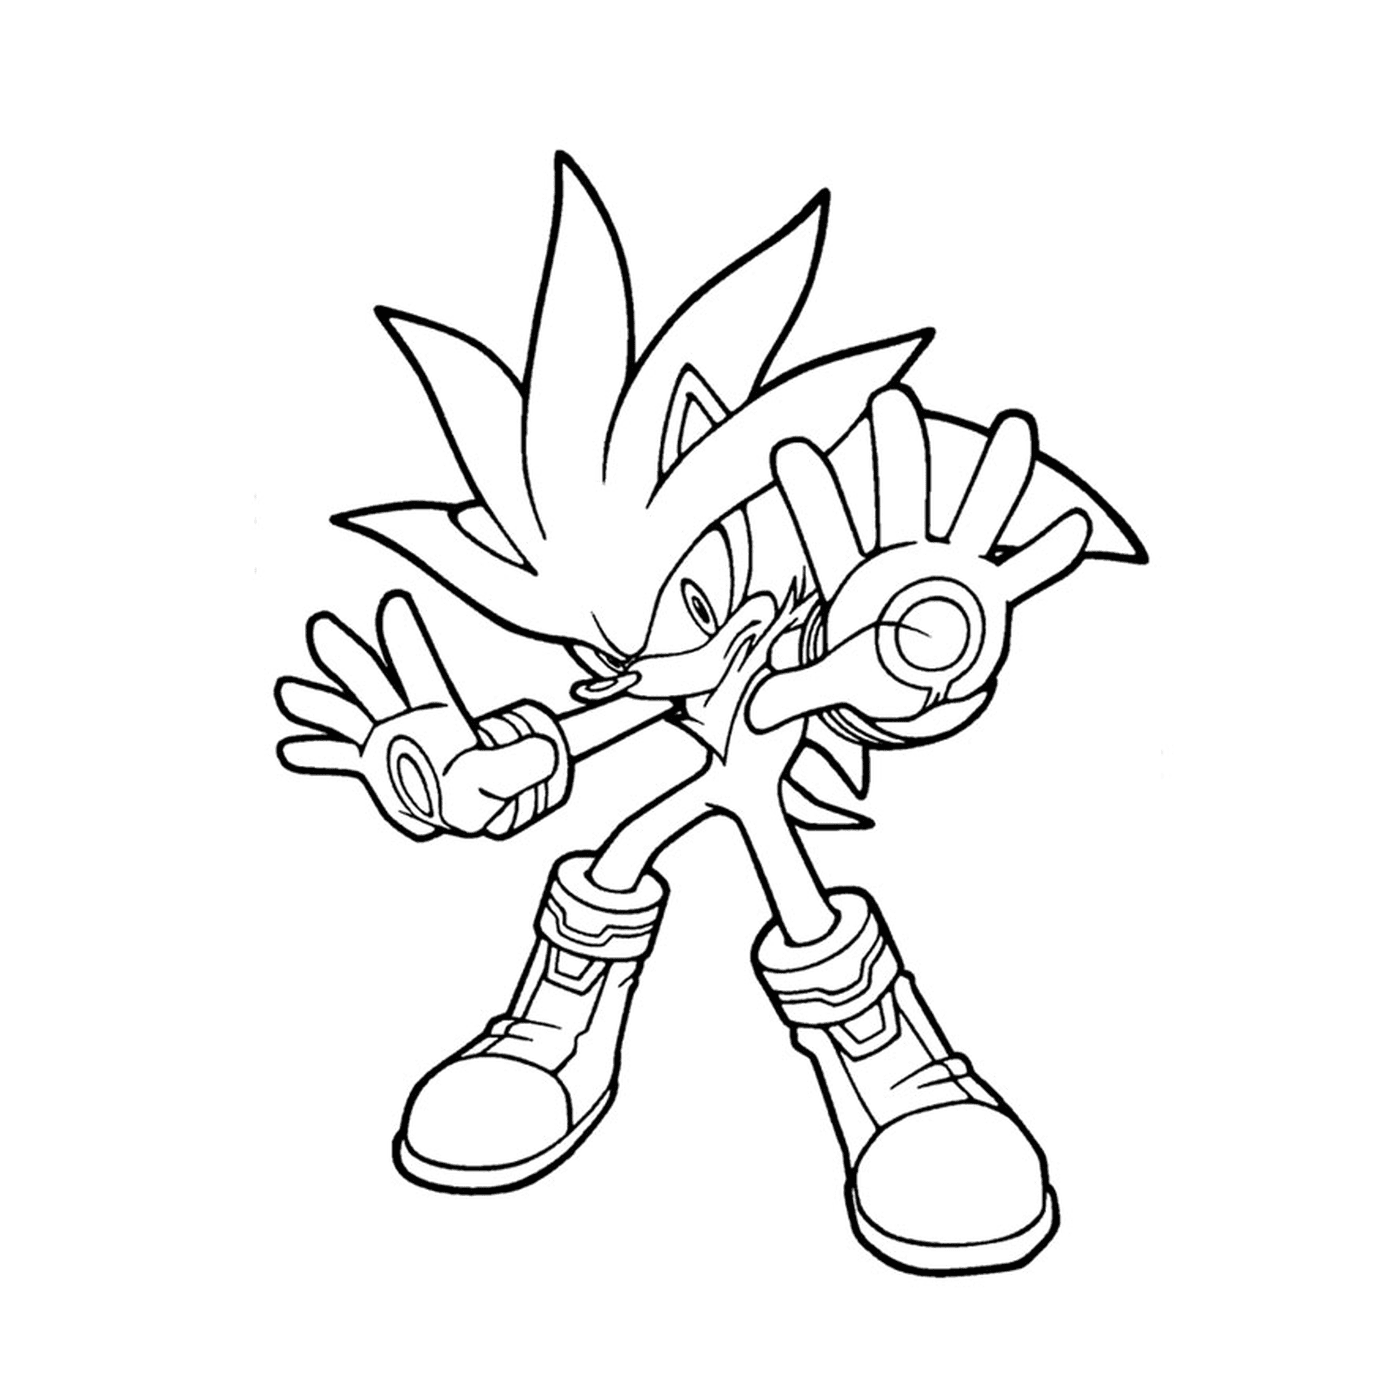  Sonic in the animated series Sonic X 